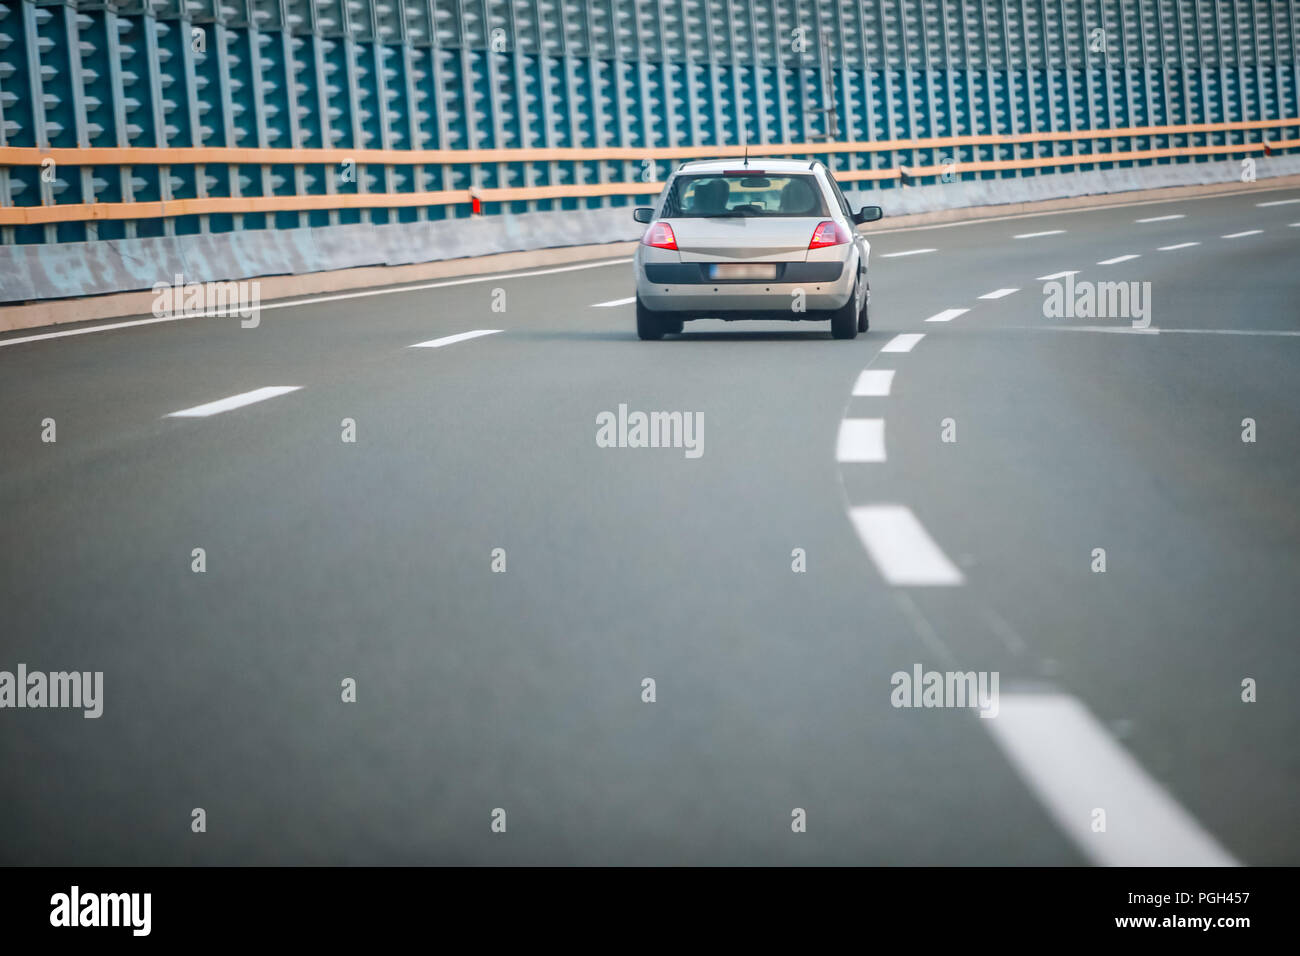 Rear view of car driving on the highway with noise barrier. Stock Photo